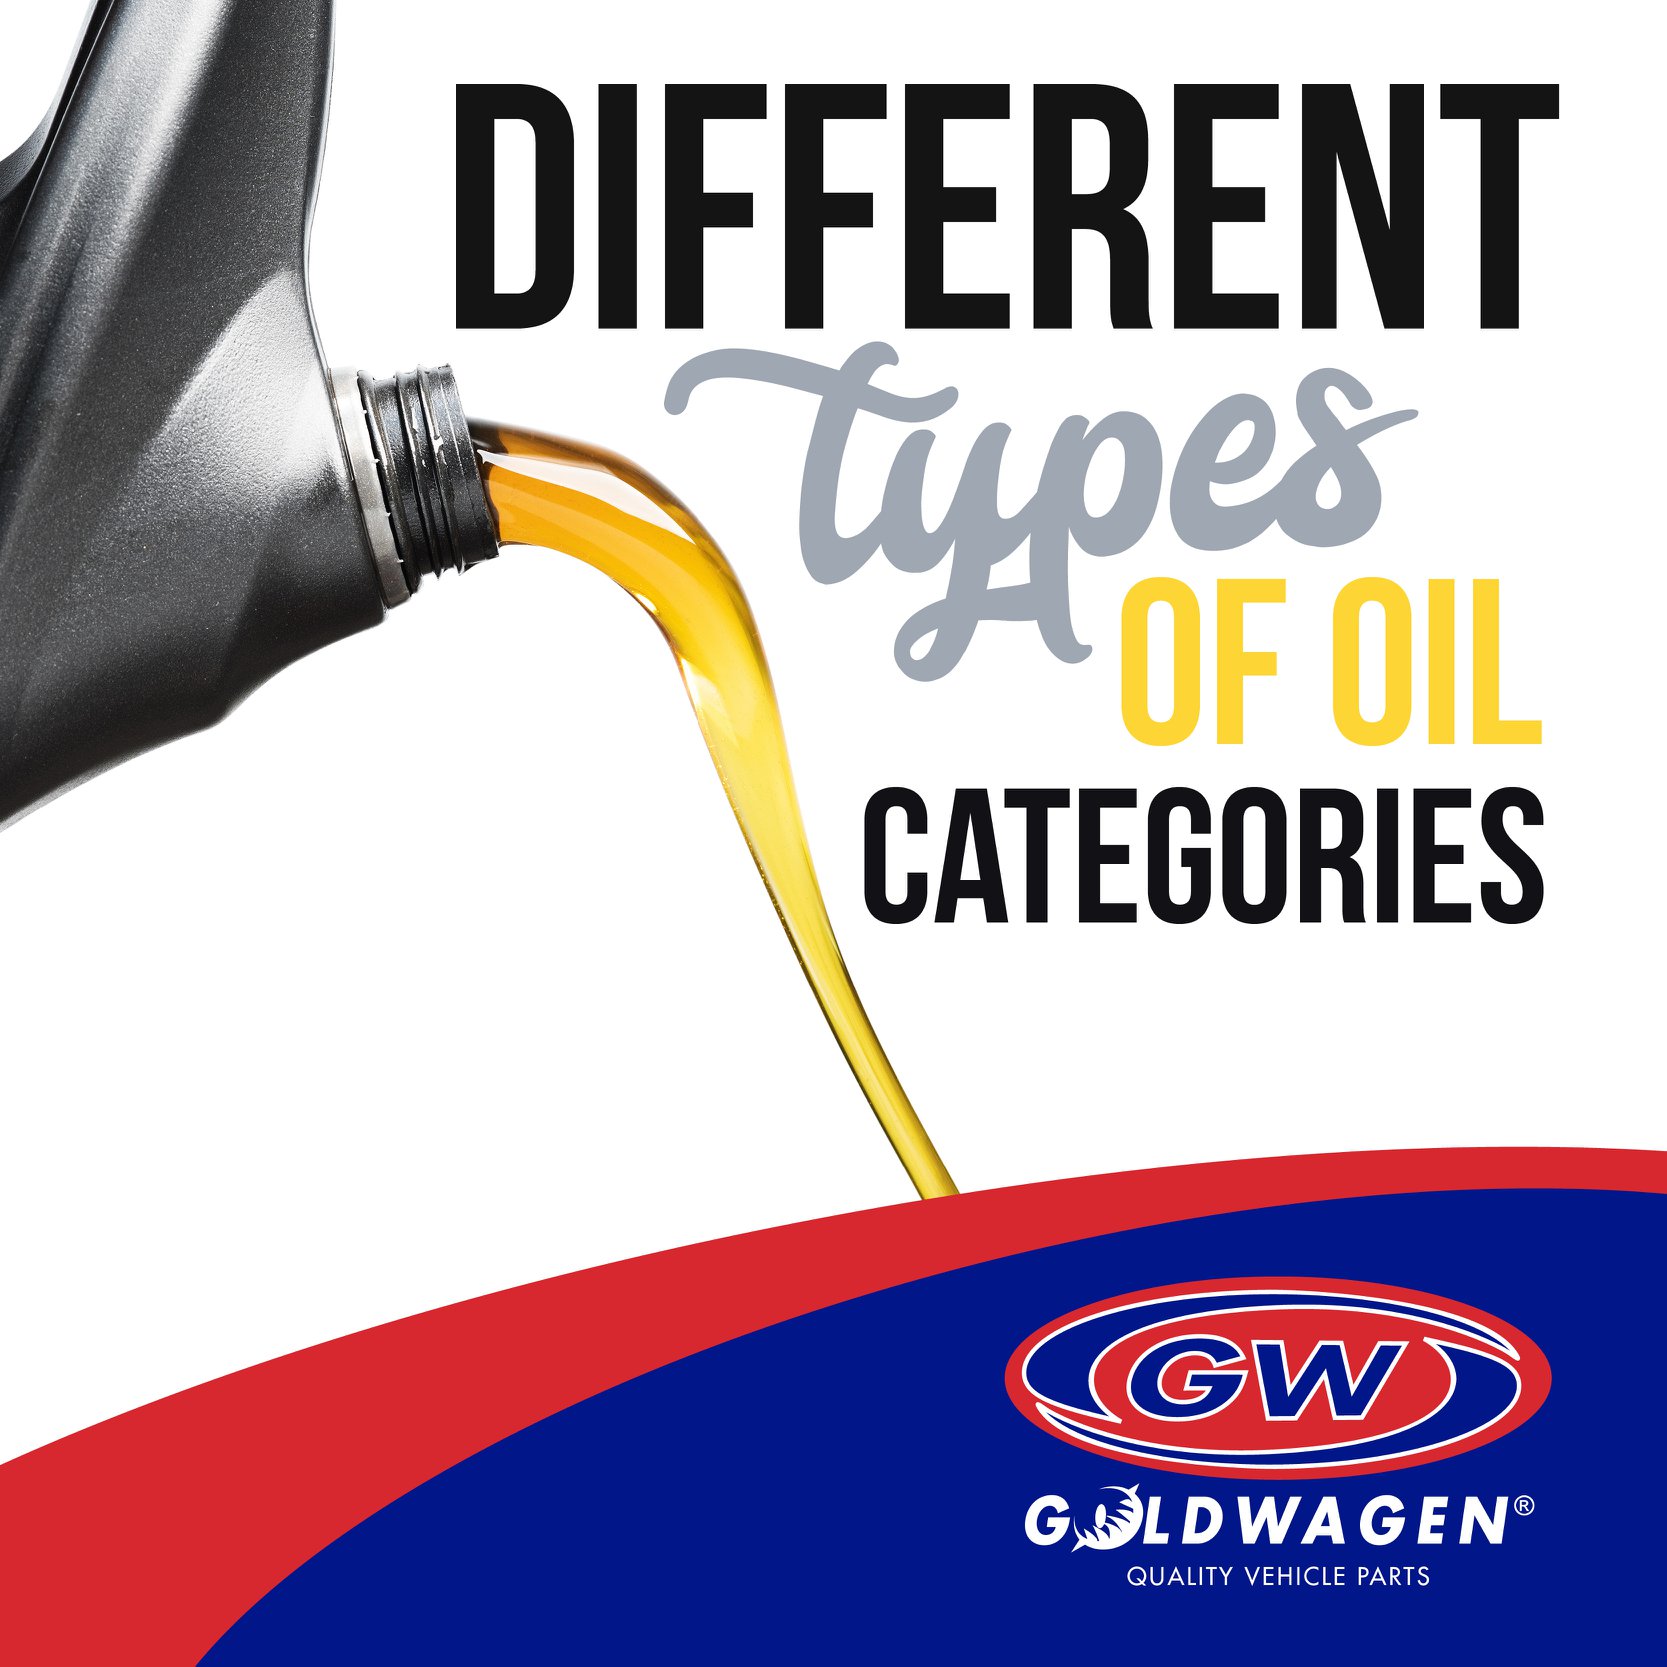 What are the different Oil Categories?